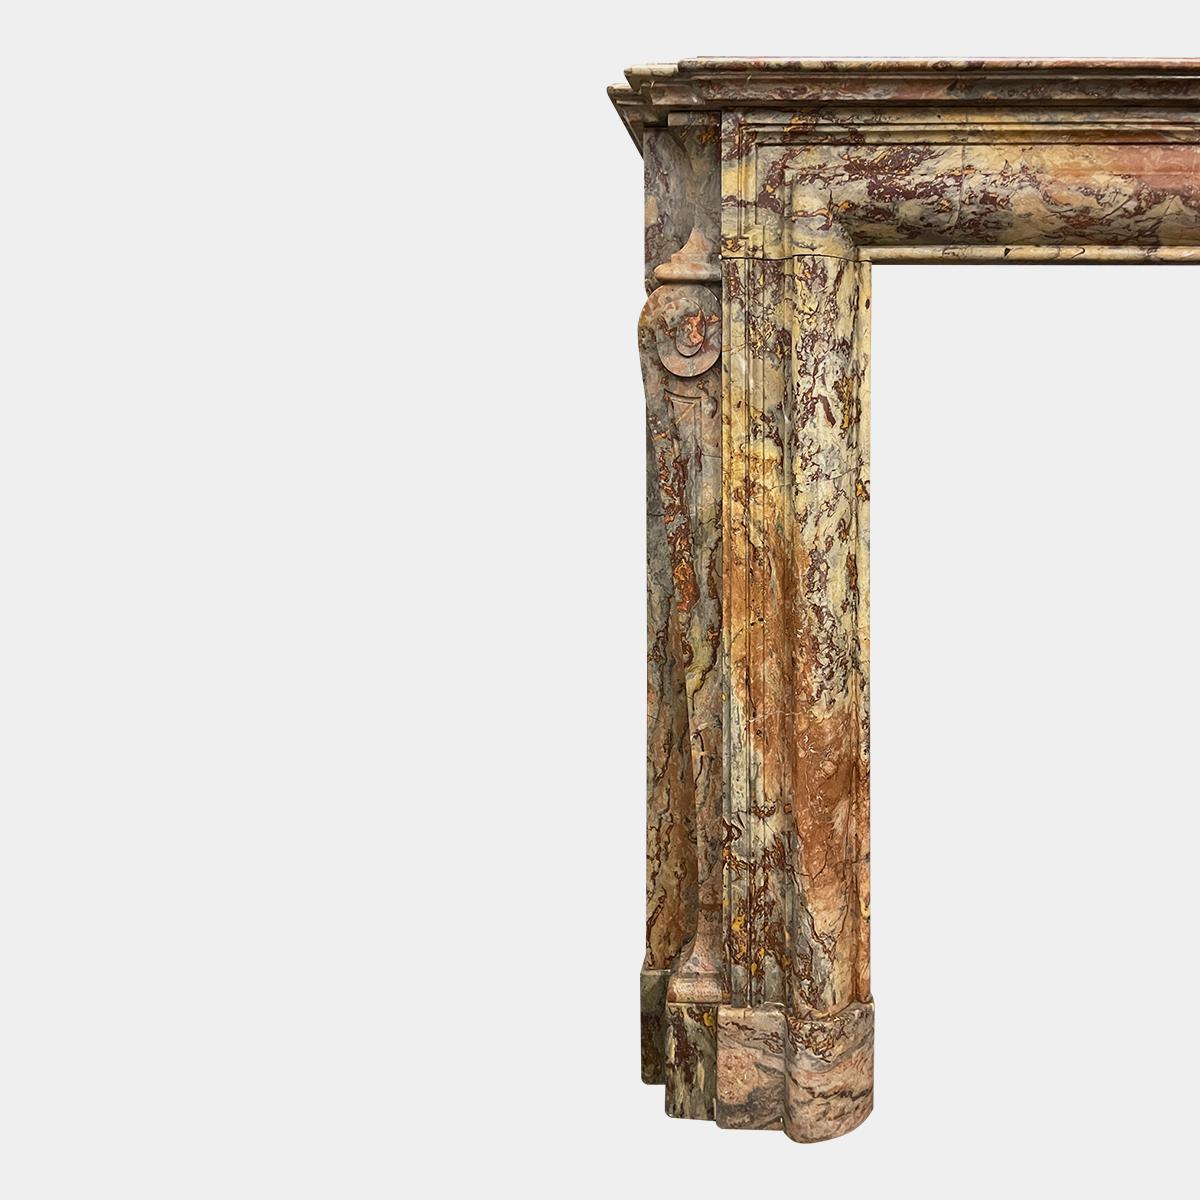 A late 18th century Louis XIV style fireplace in rich and highly variegated Sarrancolin Fantastico marble. The stepped shelf breaking back to follow the returns on the jambs, which have outward left and right facing swept scrolled brackets with